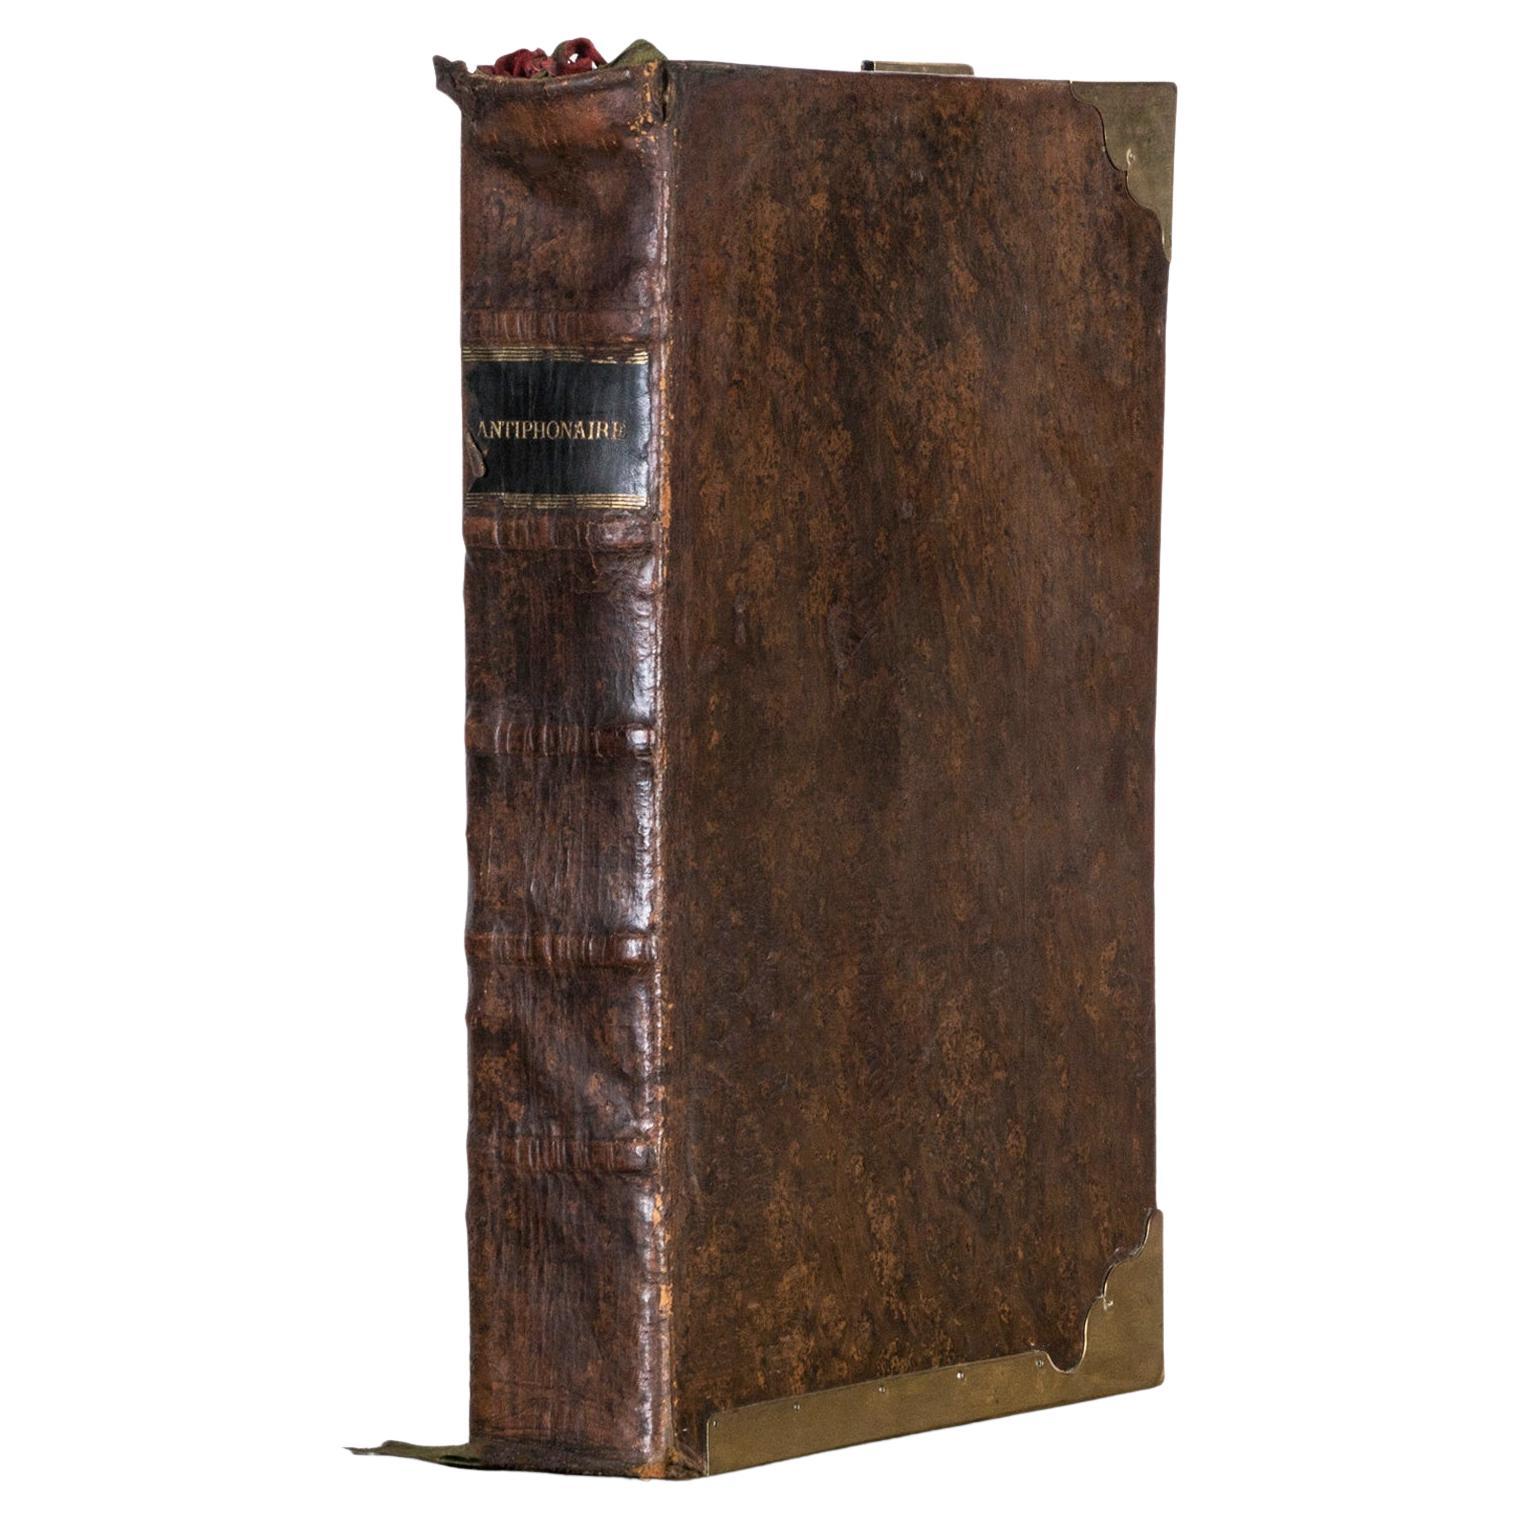 Large Antique Roman Hymnal or Song Book “Antiphonaire”, 1862   For Sale